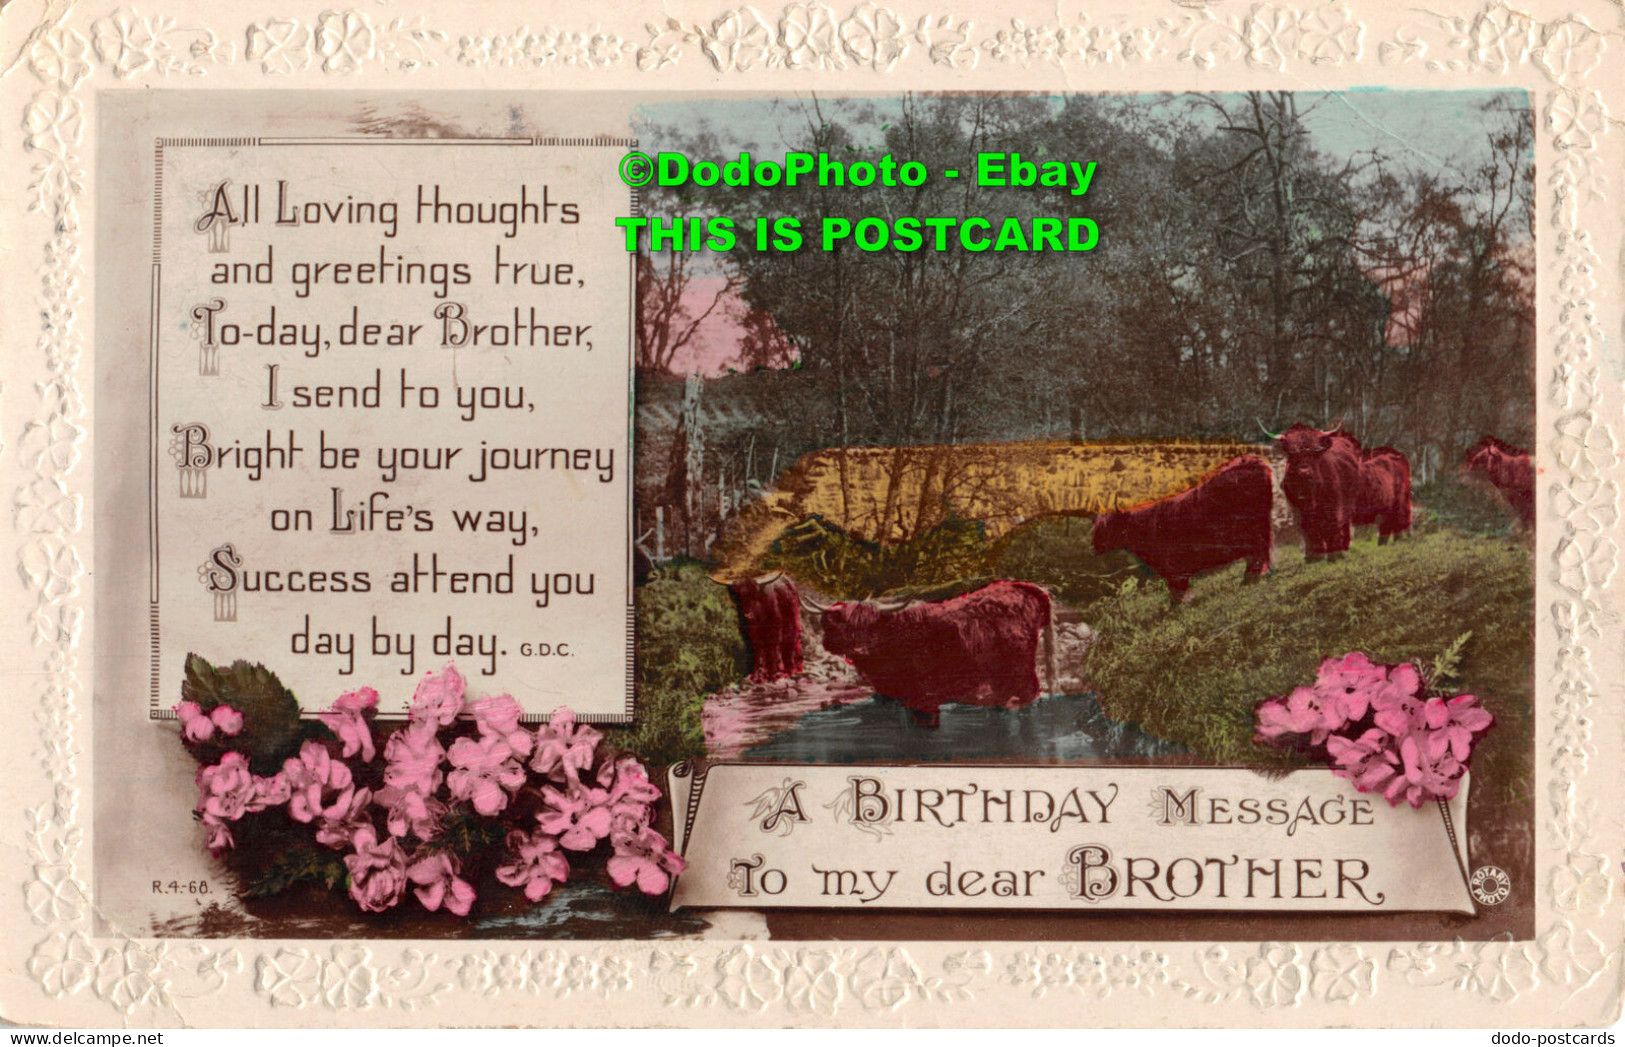 R415005 A Birthday Message To My Dear Brother. Cows. Flowers. Rotary Photo. Raja - World